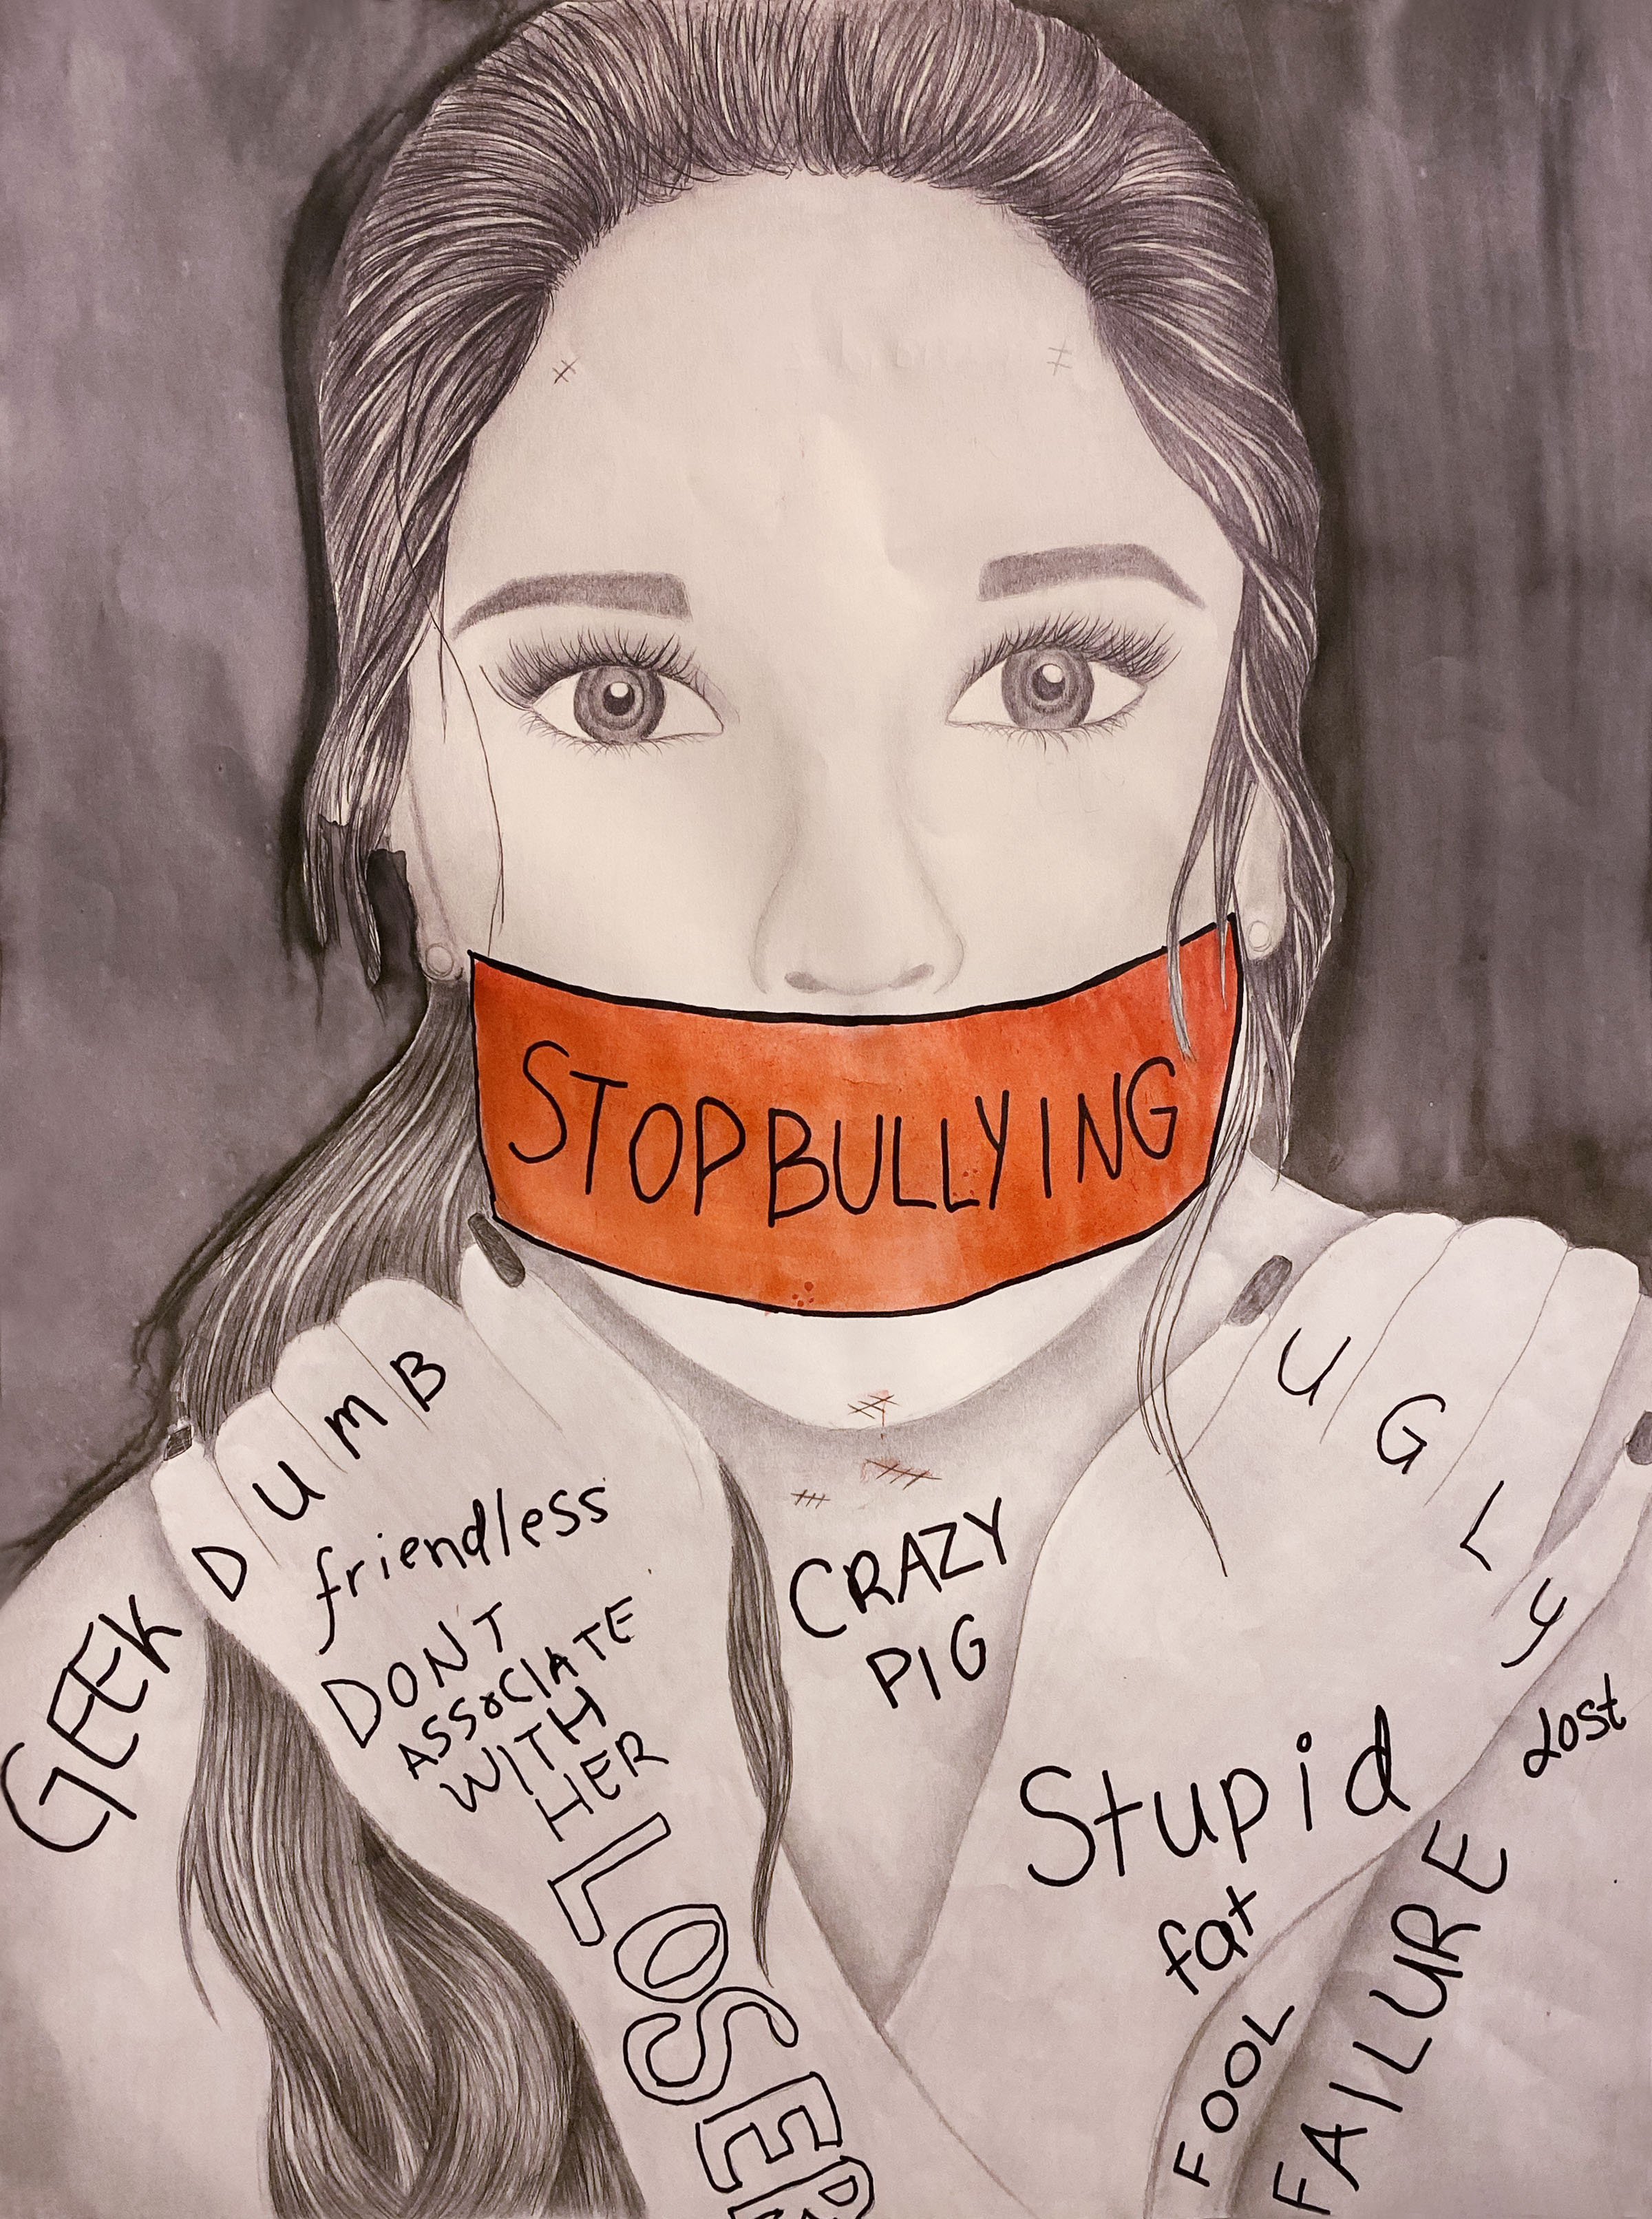 Bullying Poster Making Contest Say no to bullying with this educational